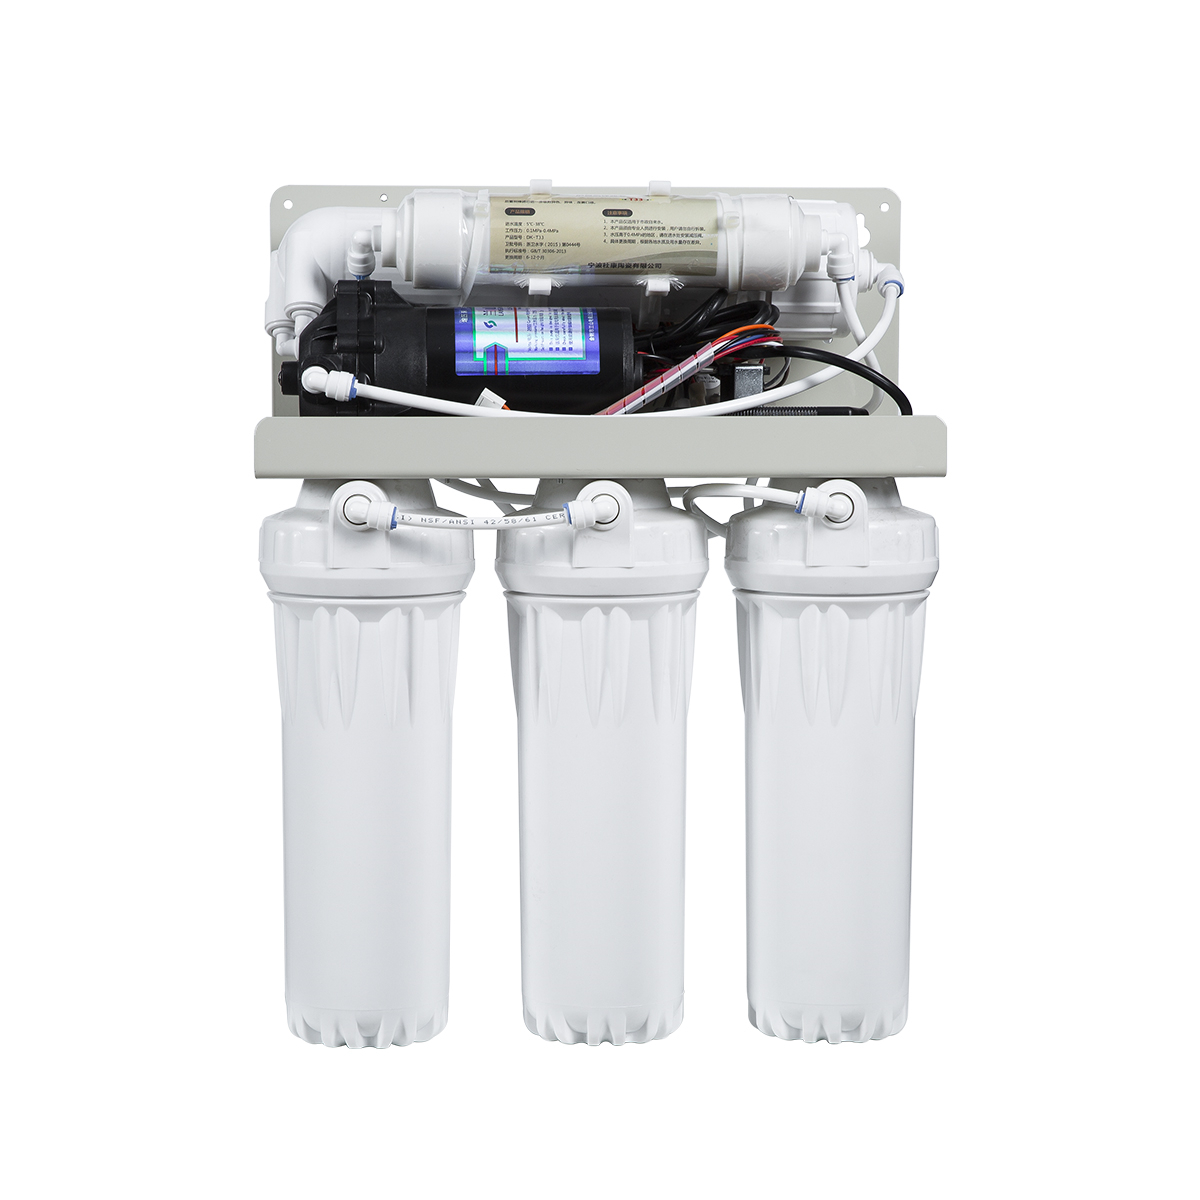 RO water filter system TN-RO75-12A